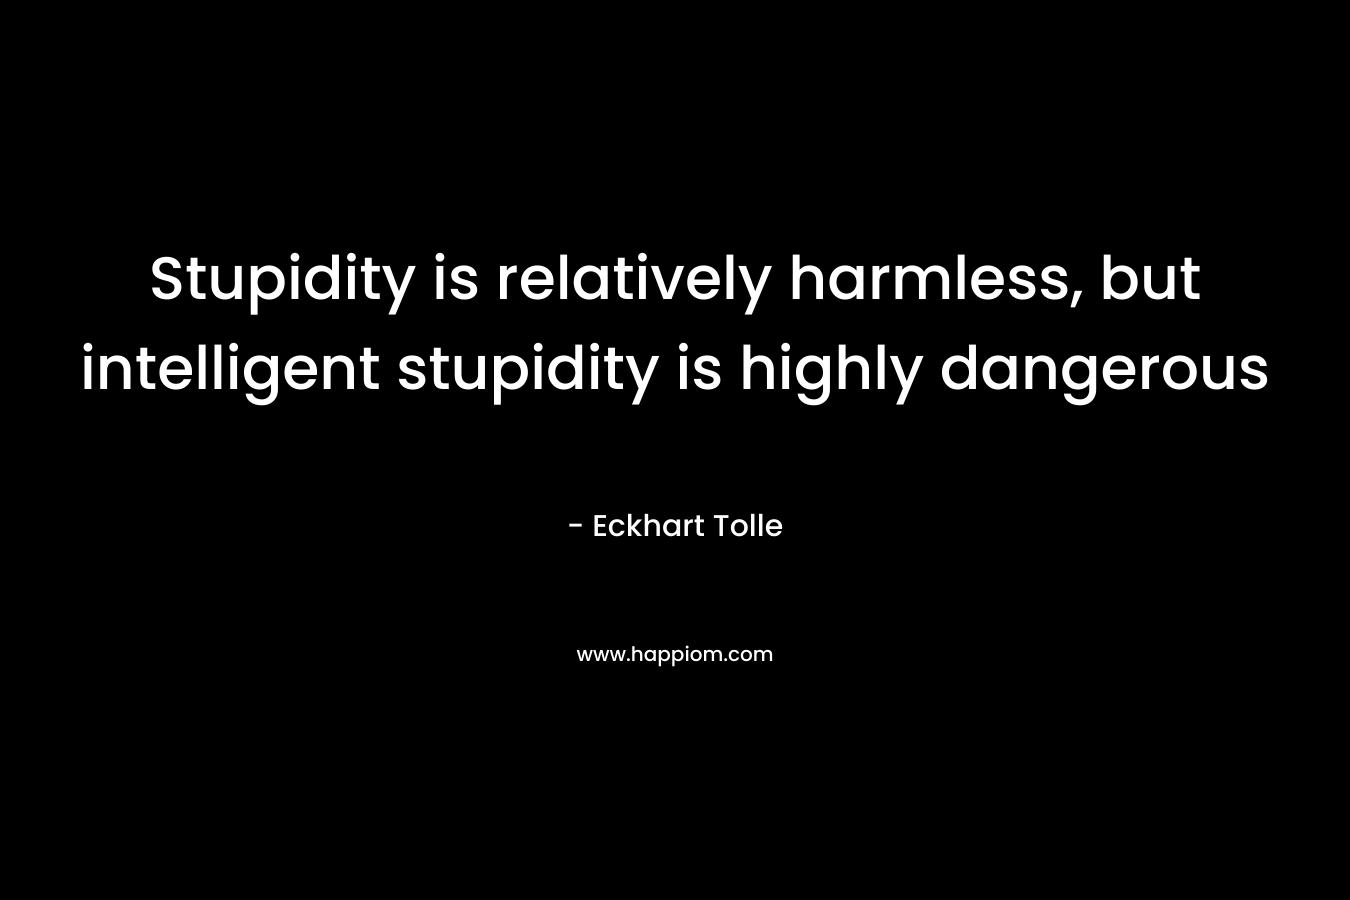 Stupidity is relatively harmless, but intelligent stupidity is highly dangerous